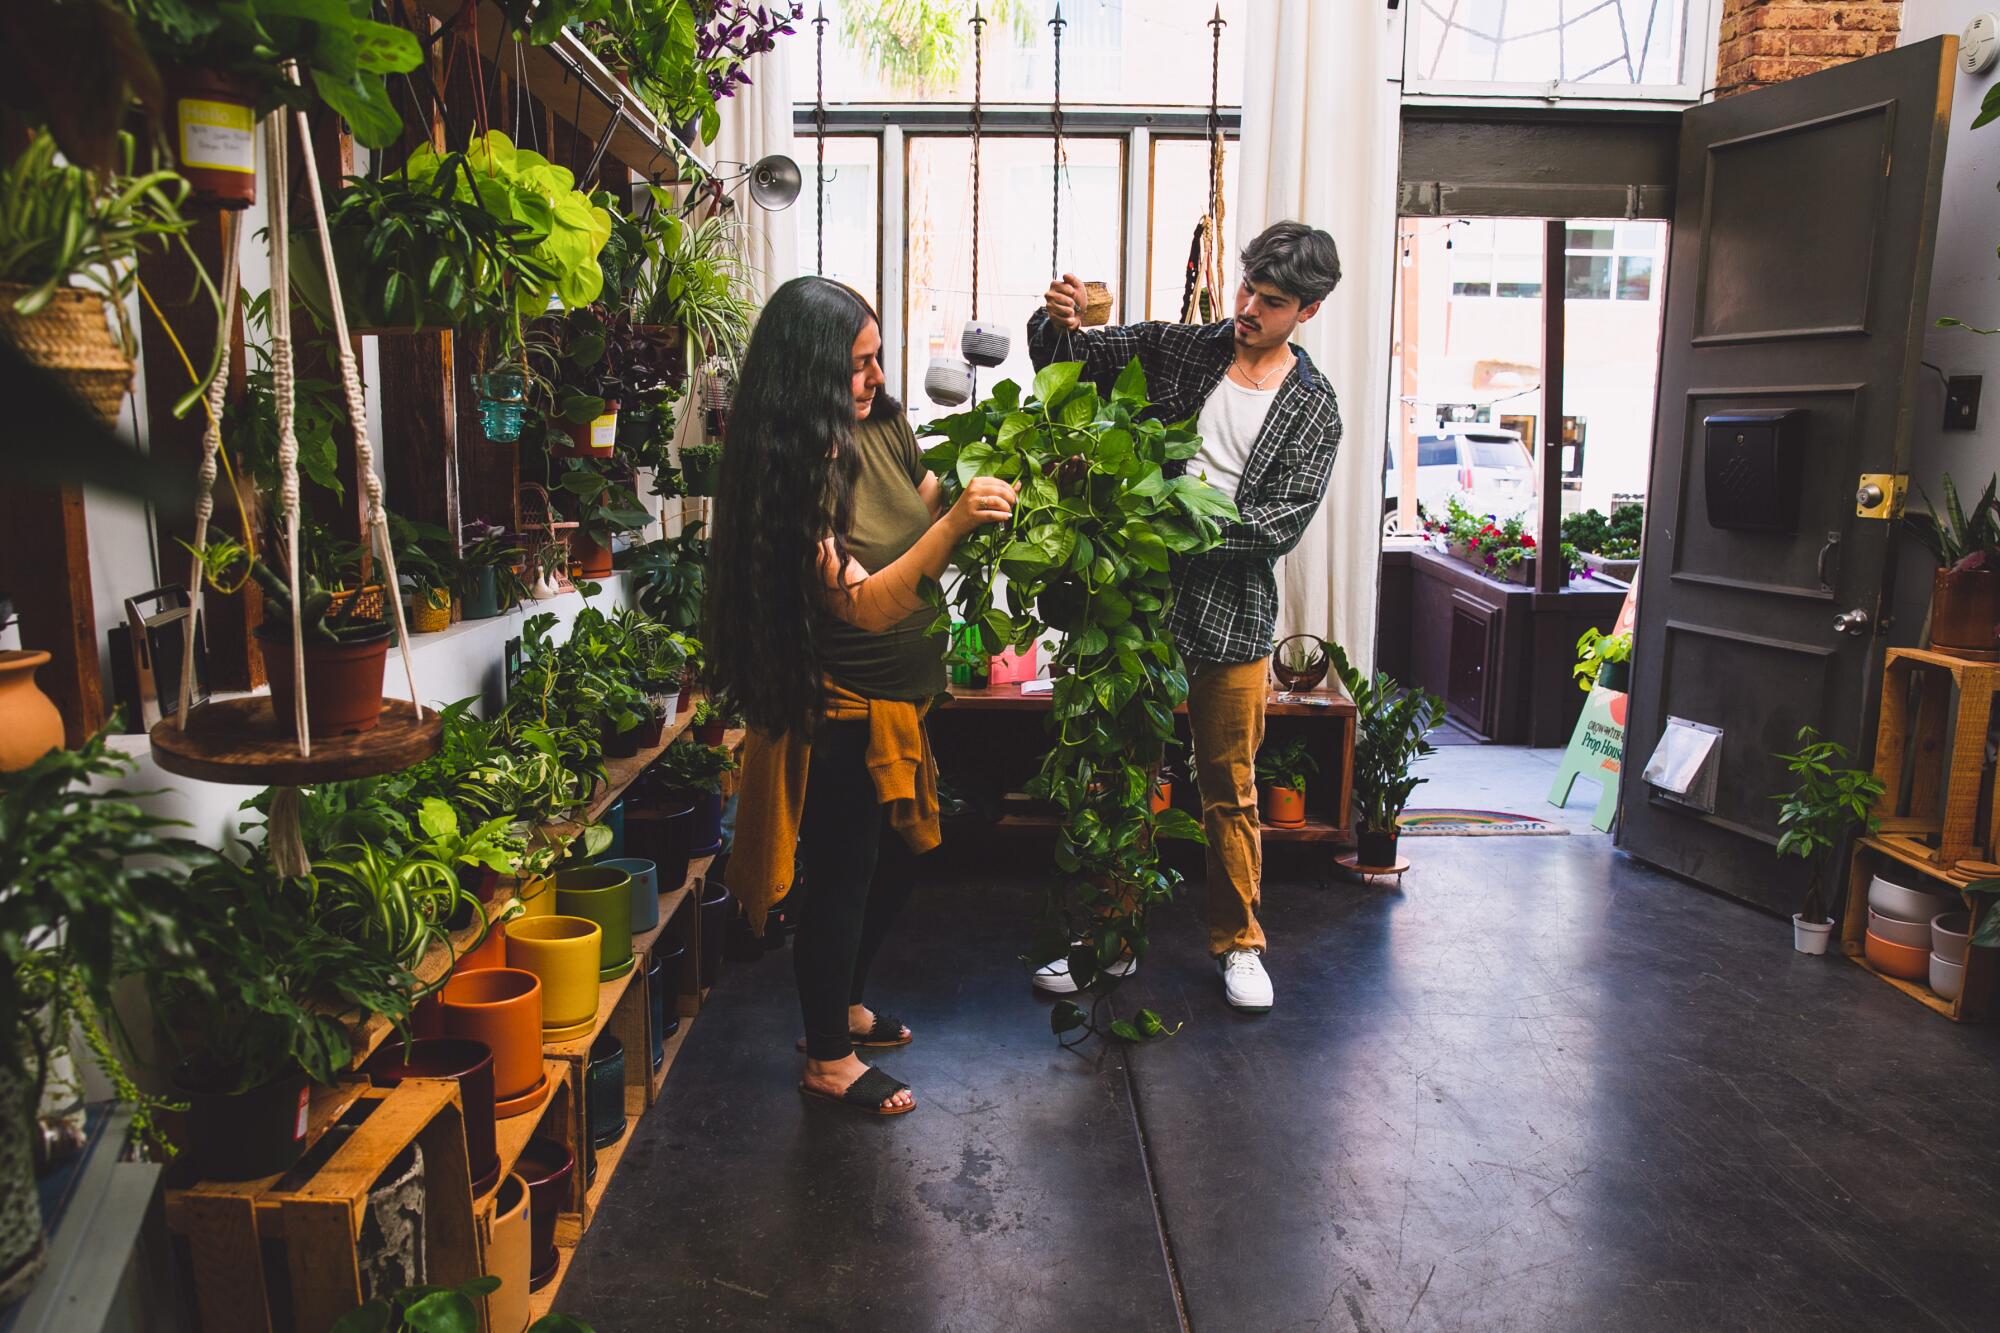 A young woman and a young man lift a plant off the floor. Pots and plants surround them on shelves.